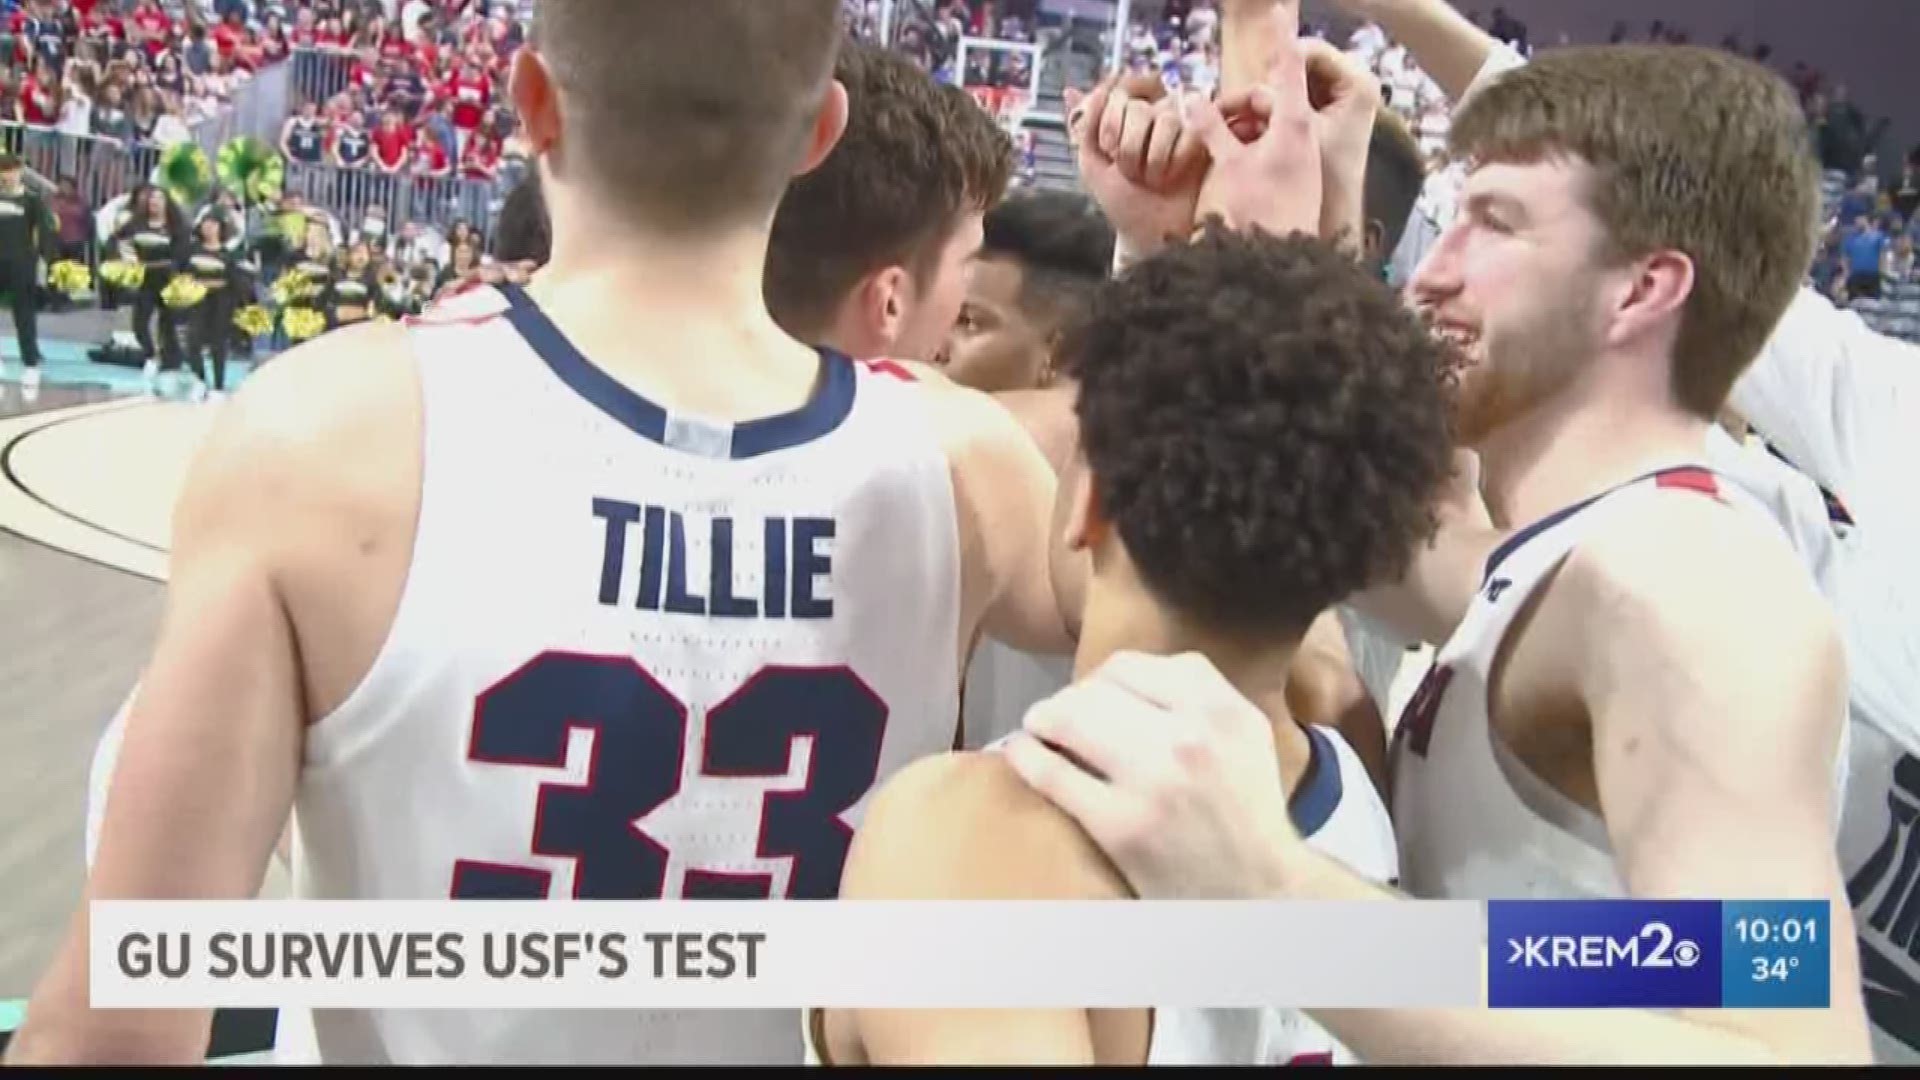 The Bulldogs will face the winner of the Saint Mary's - BYU game.